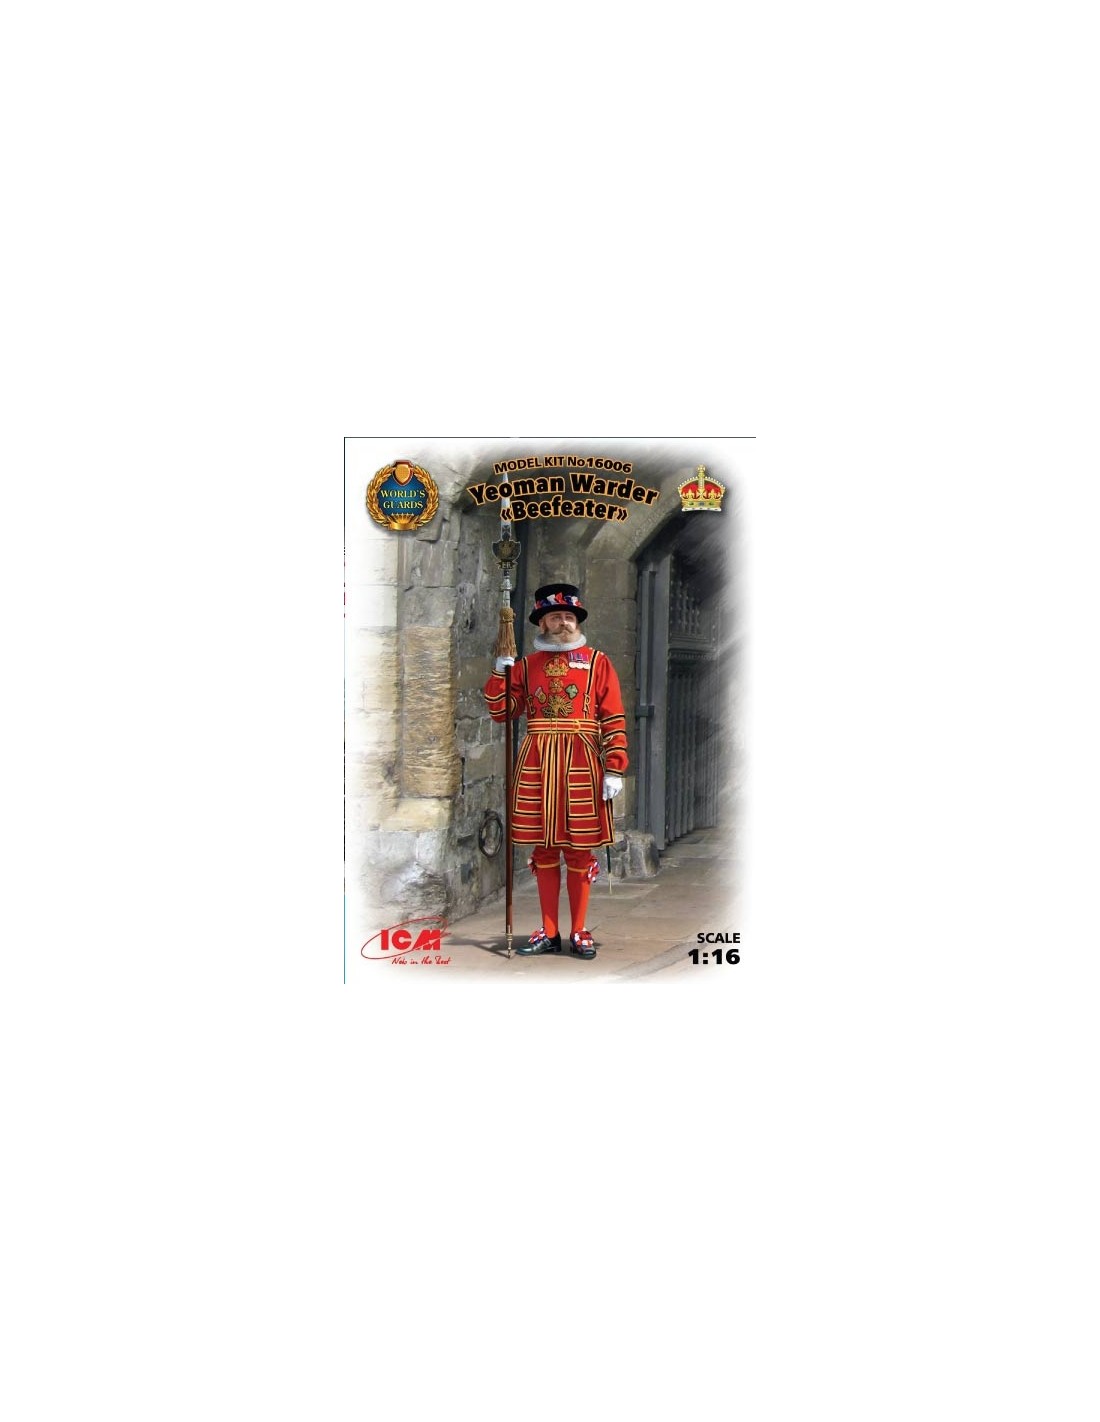 ICM Models 1/16 Yeoman Warder Guard ICM16006 Beefeater 